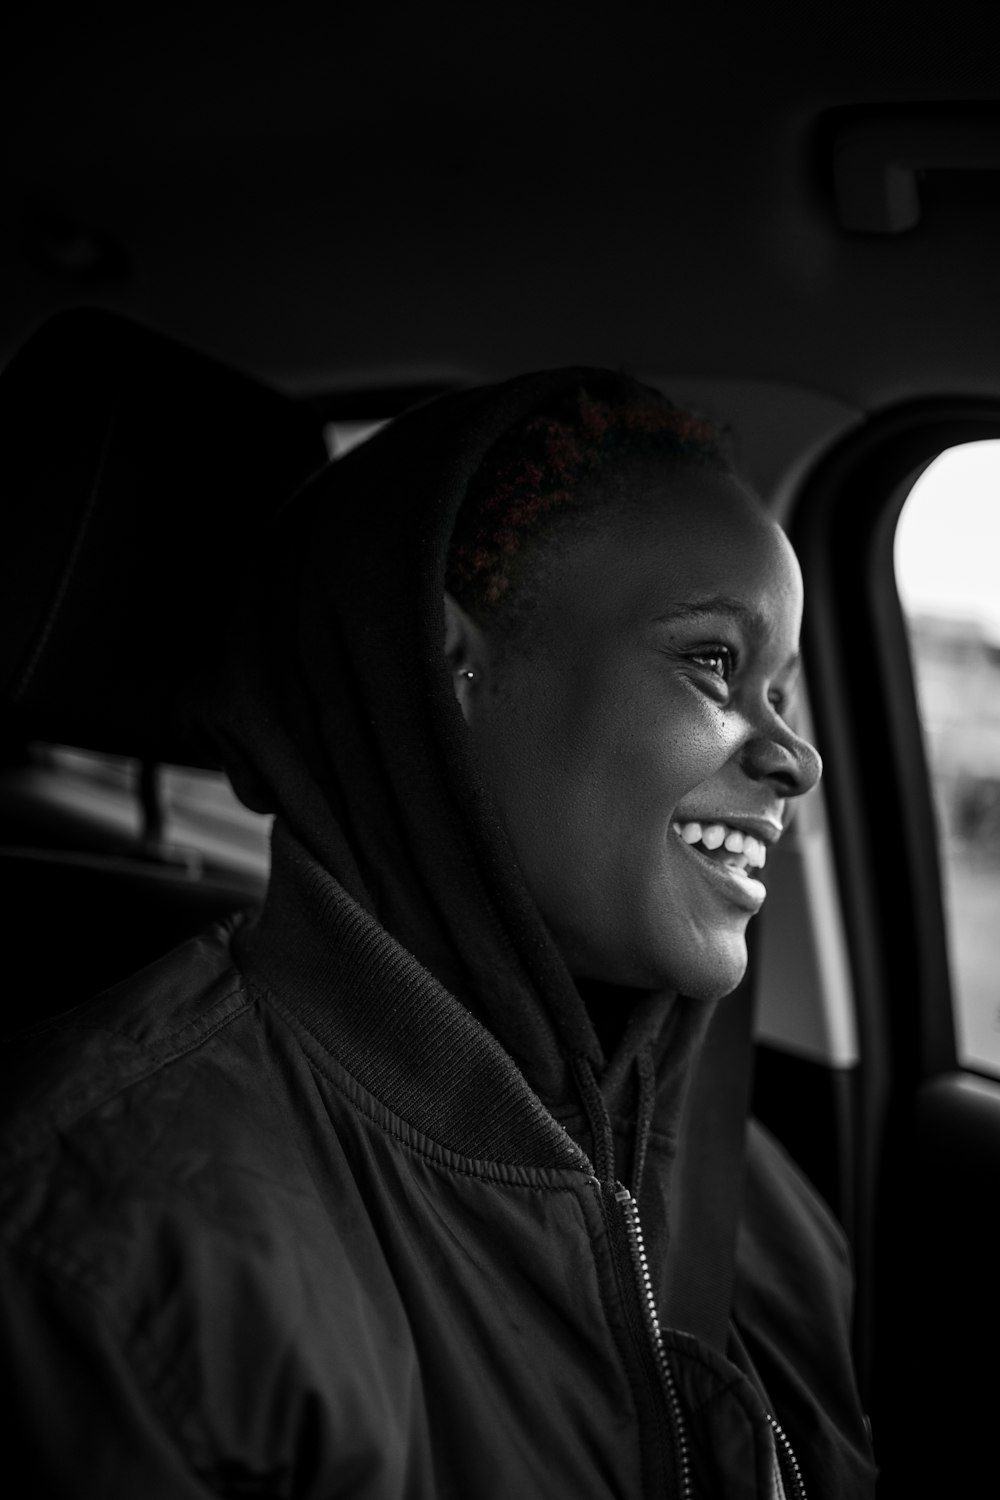 a woman sitting in the passenger seat of a car